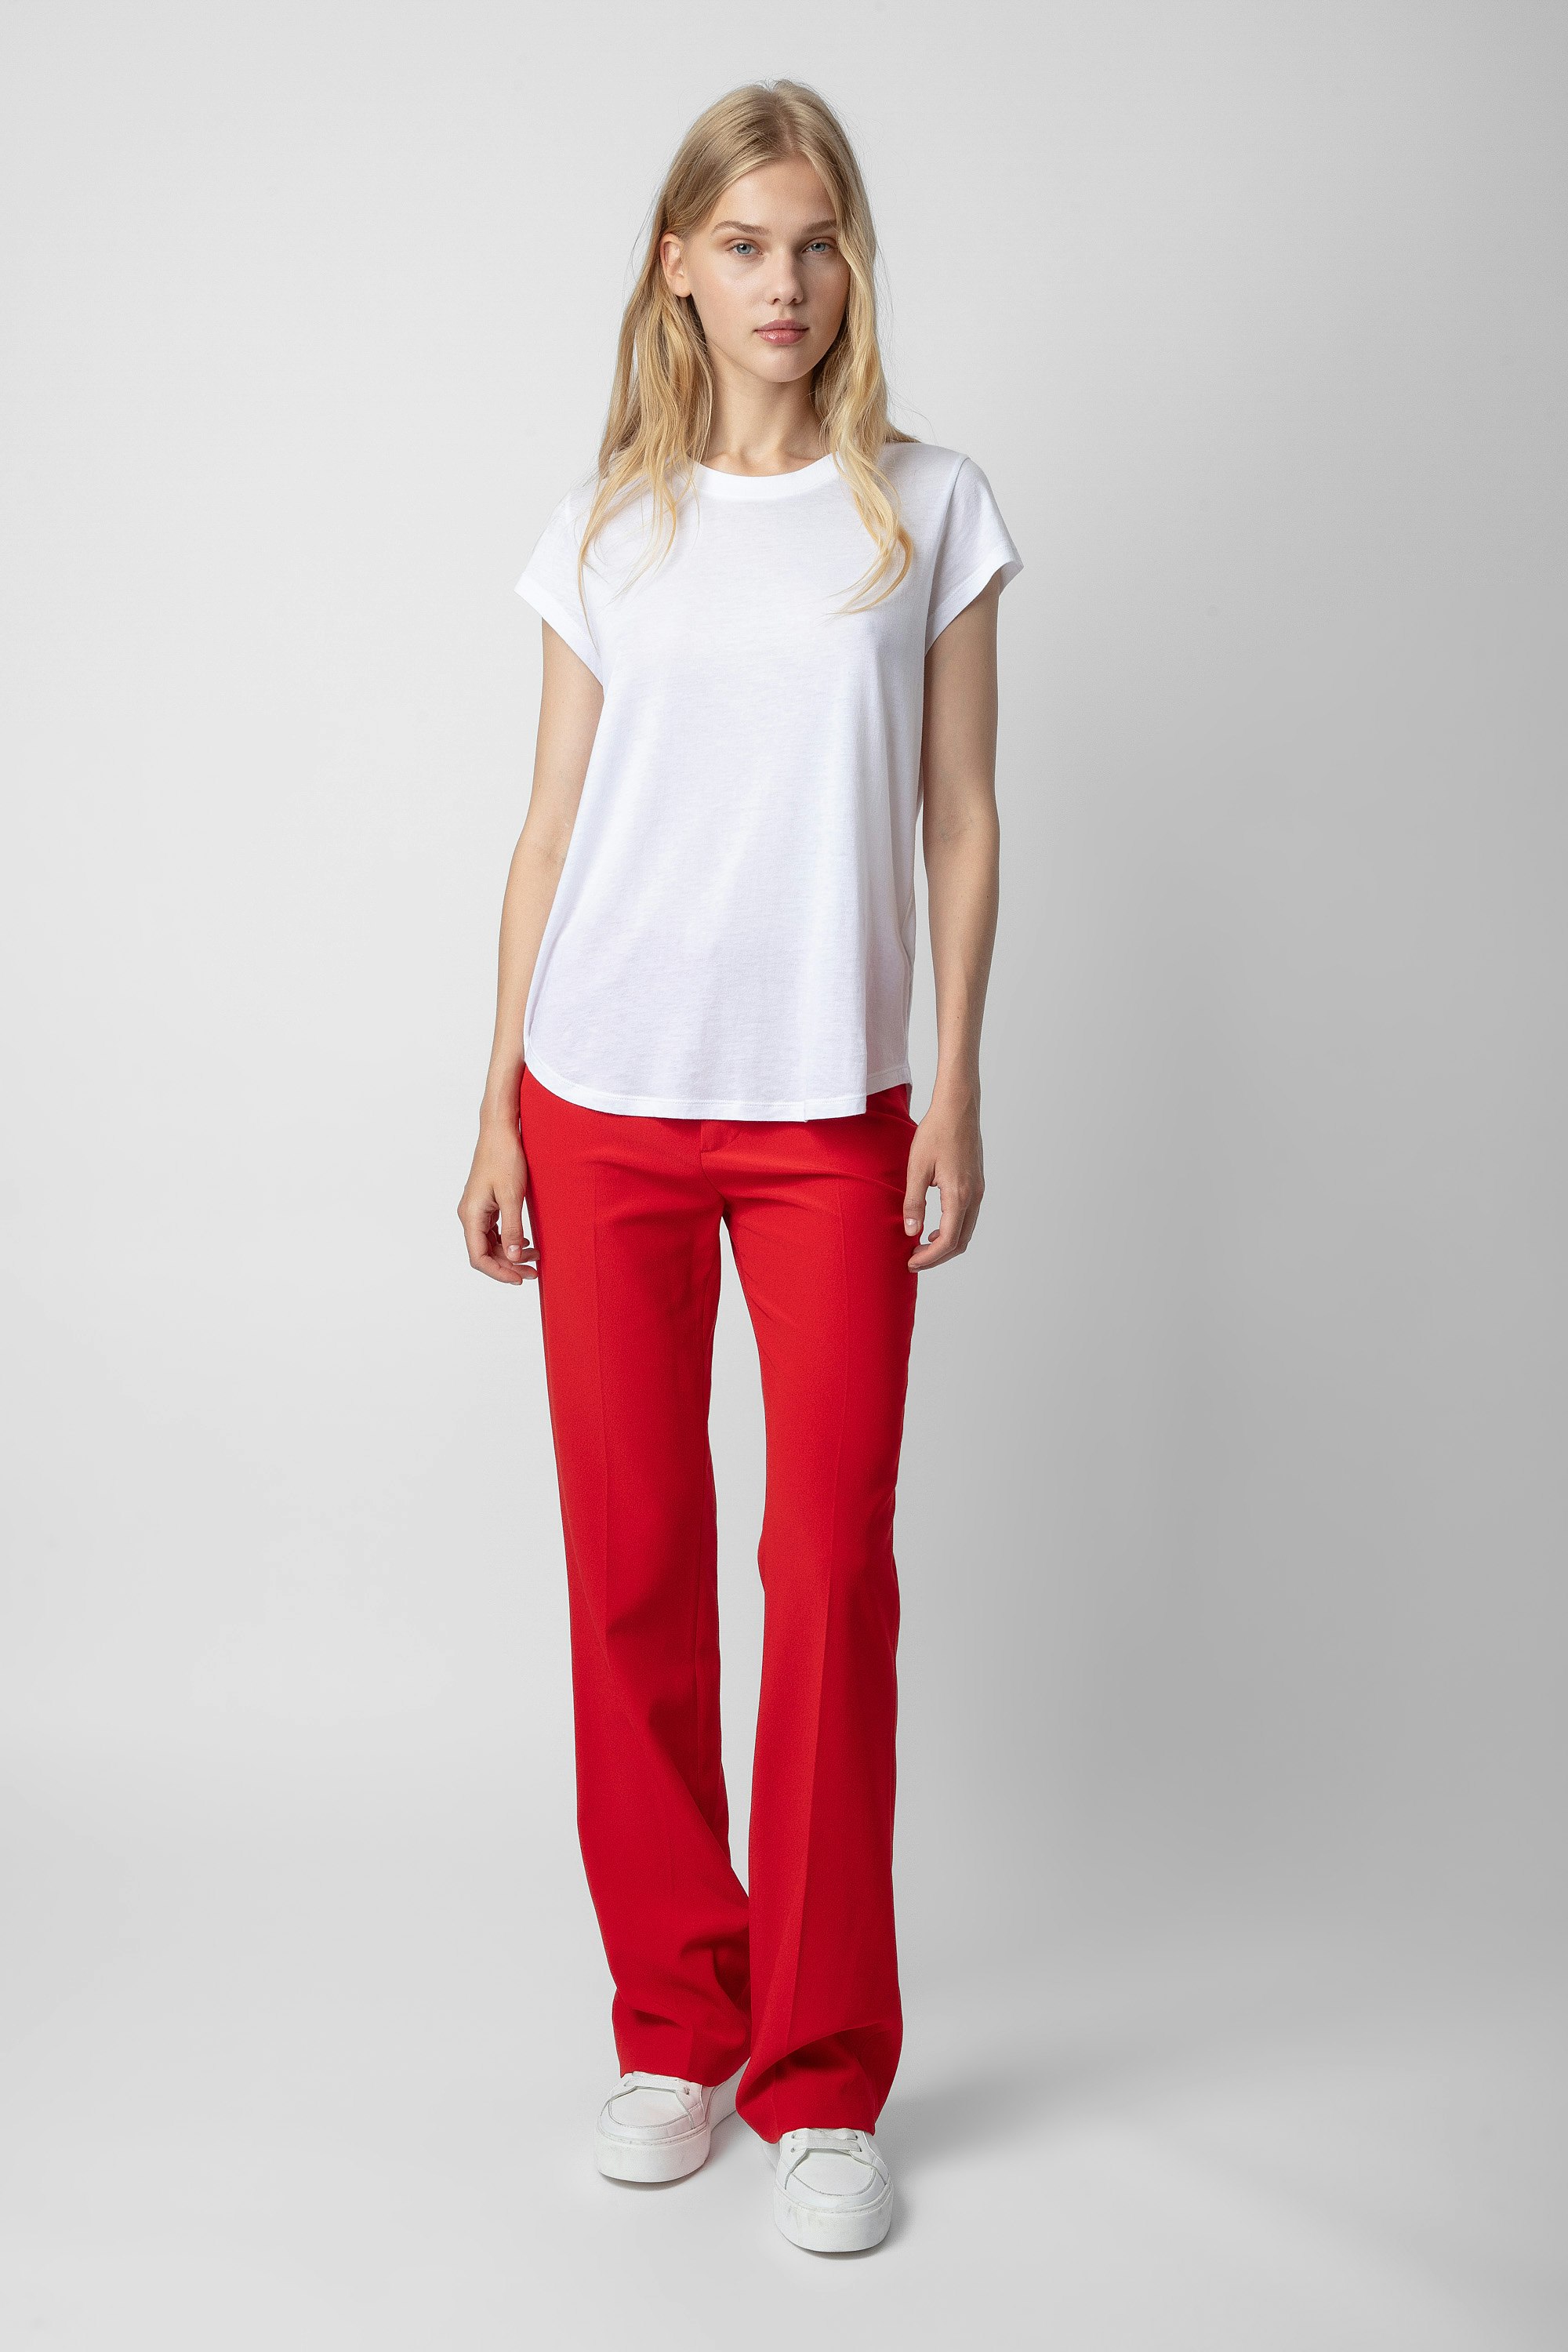 Pistol Trousers - Women’s red crêpe tailored trousers.